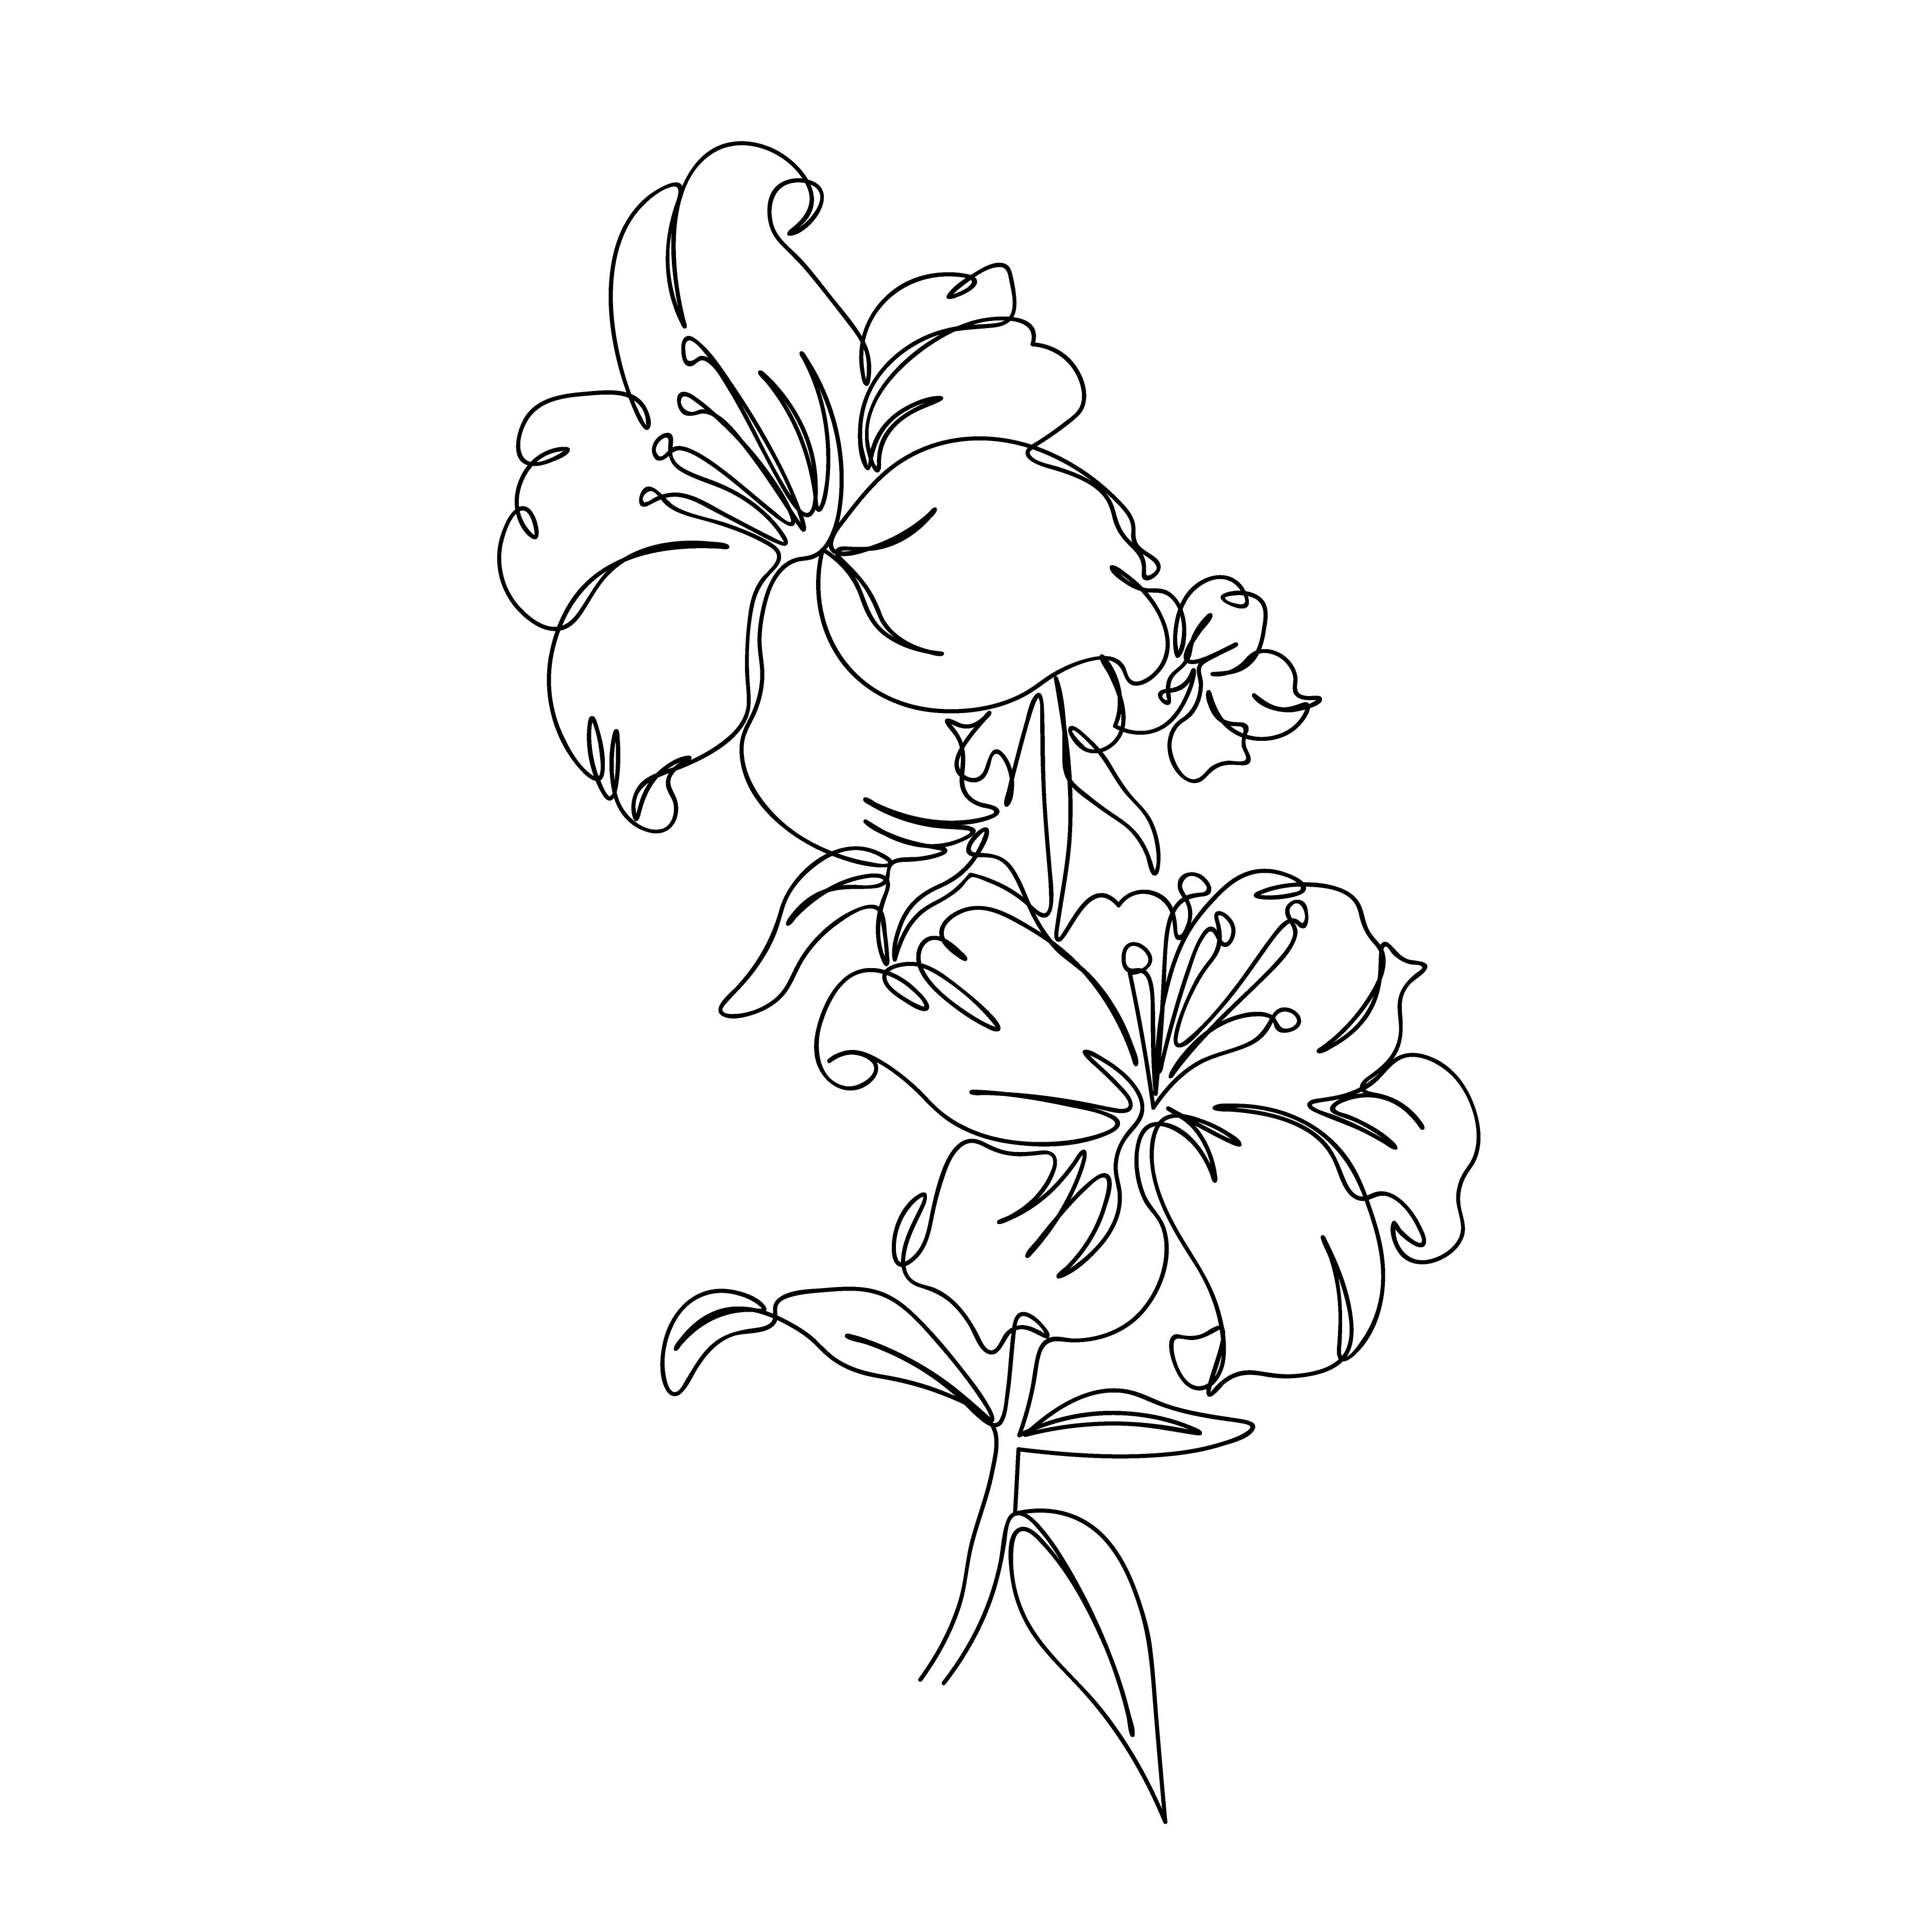 Hibiscus Flower Single Line Art Drawing For Personal Or Commercial Use cover image.